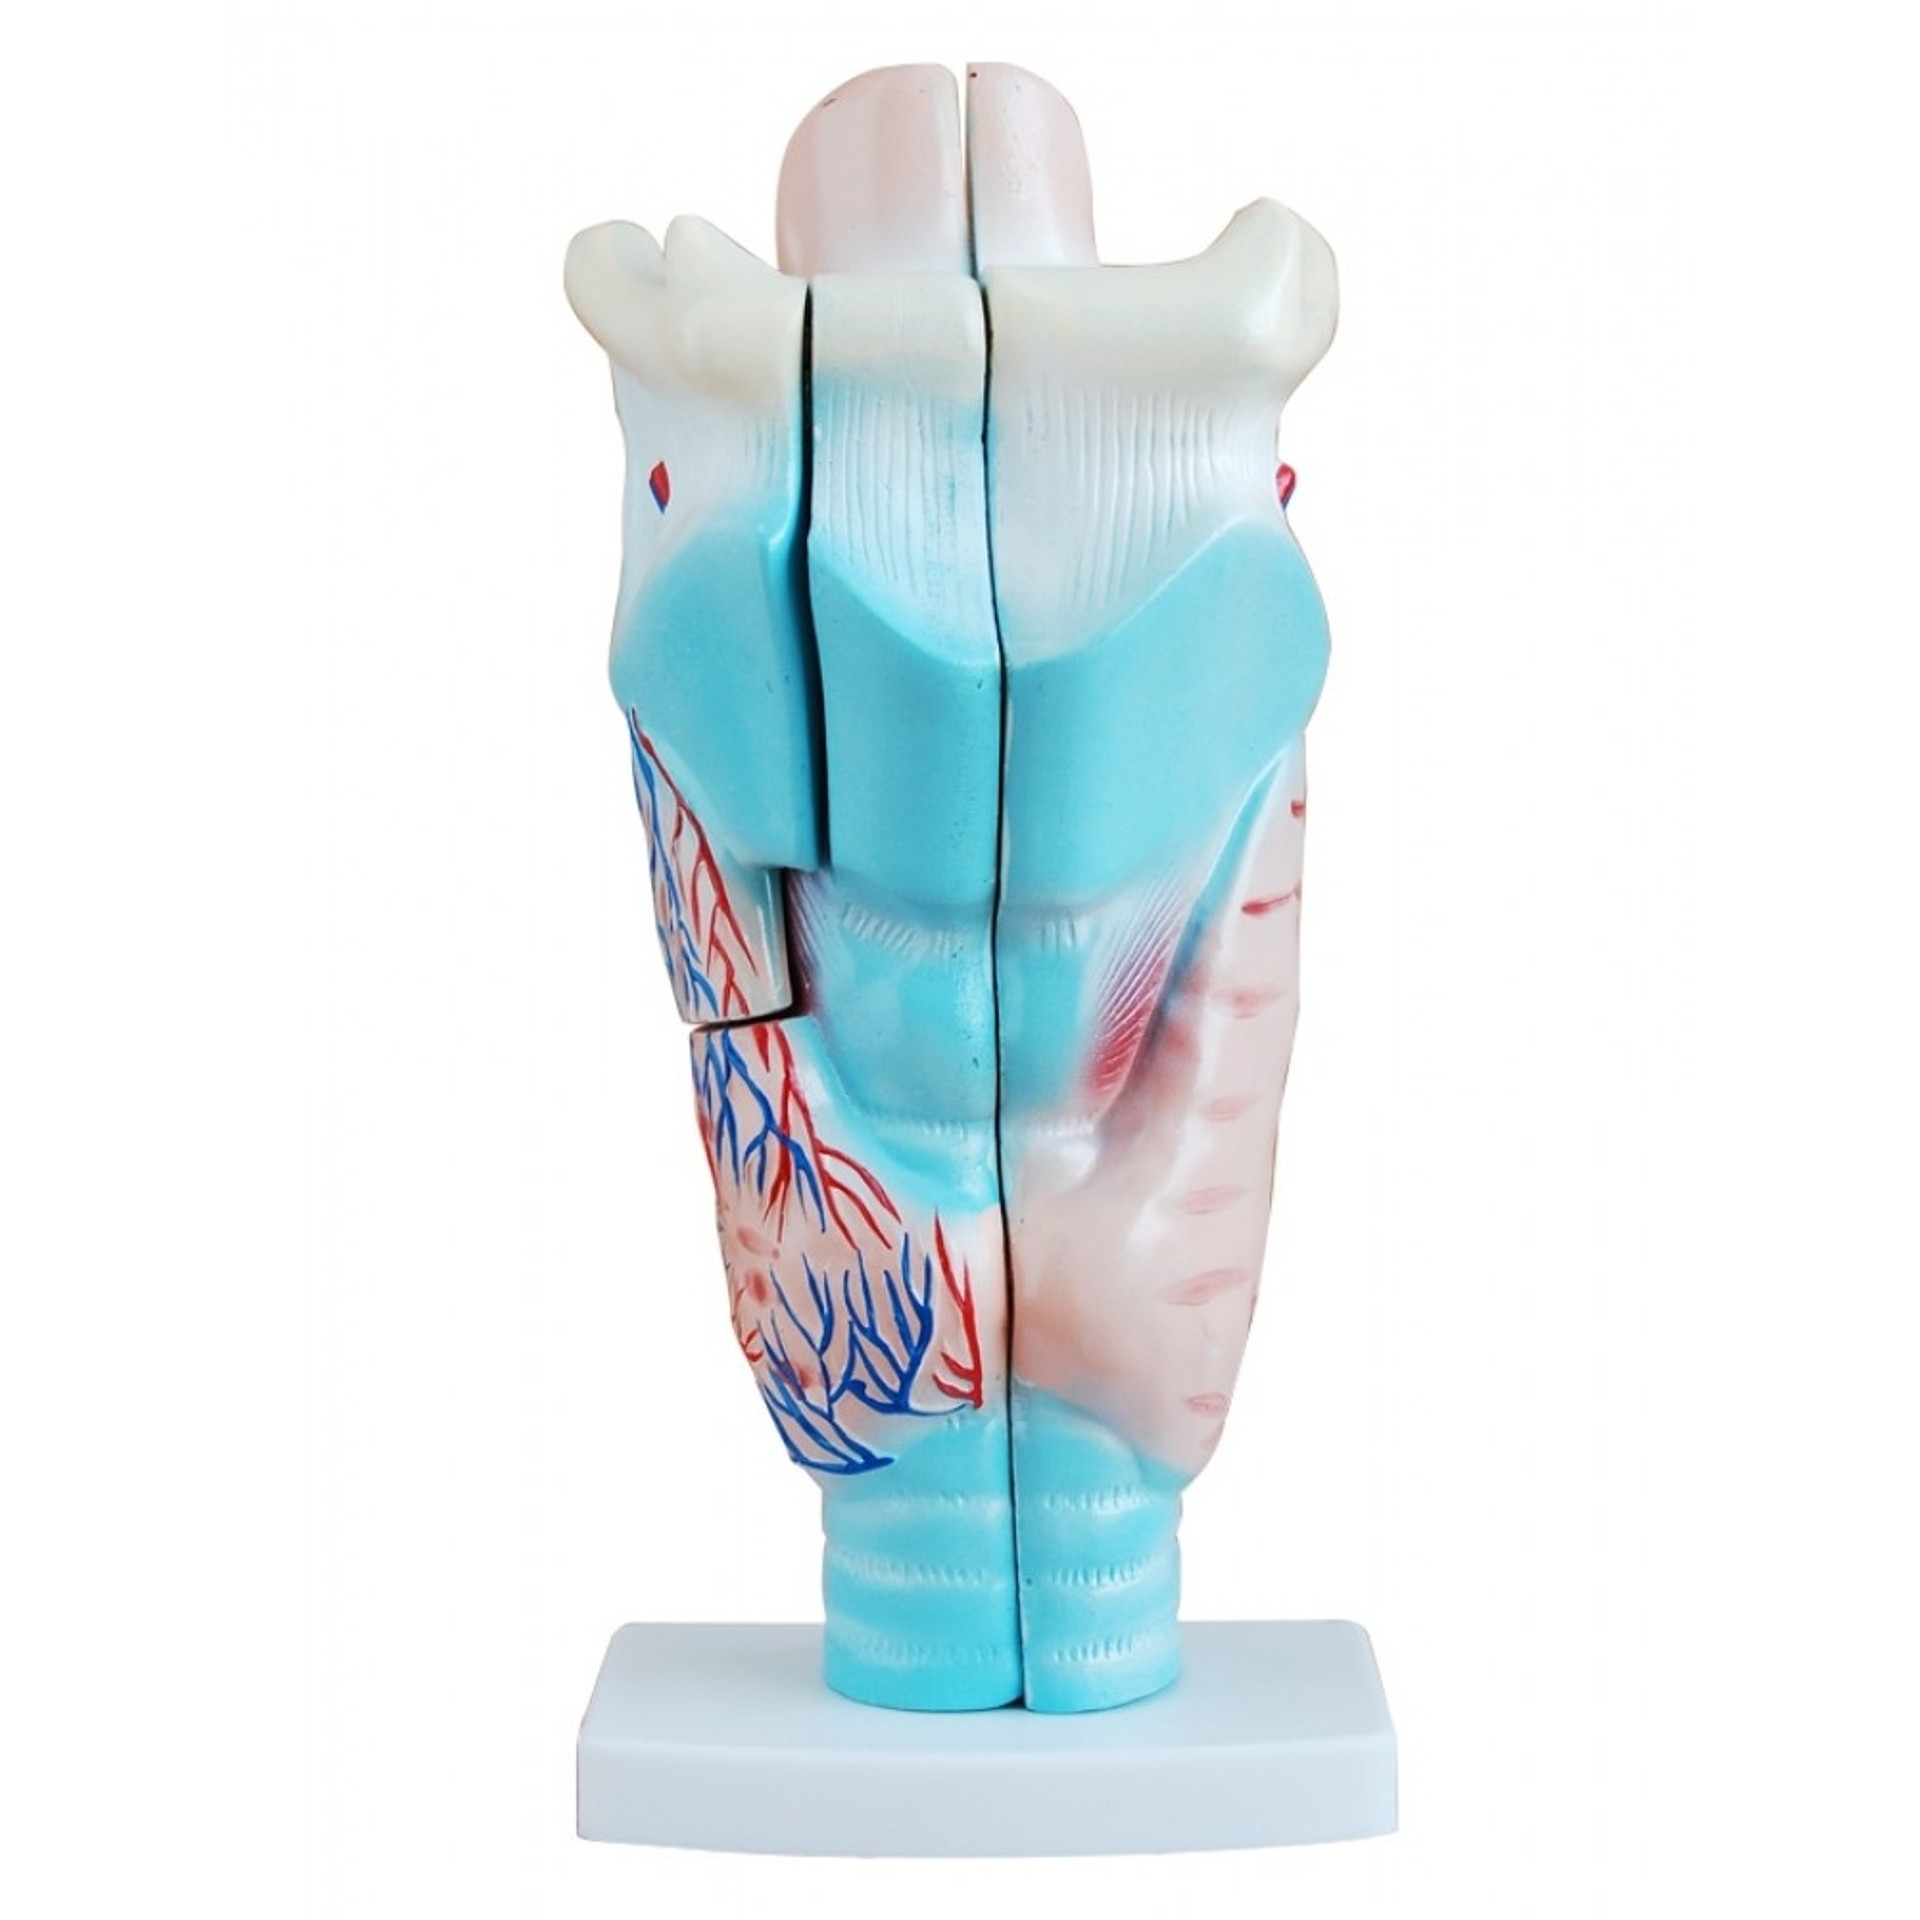 Ent Anatomy Collection Ear Nose Throat Chart Models 